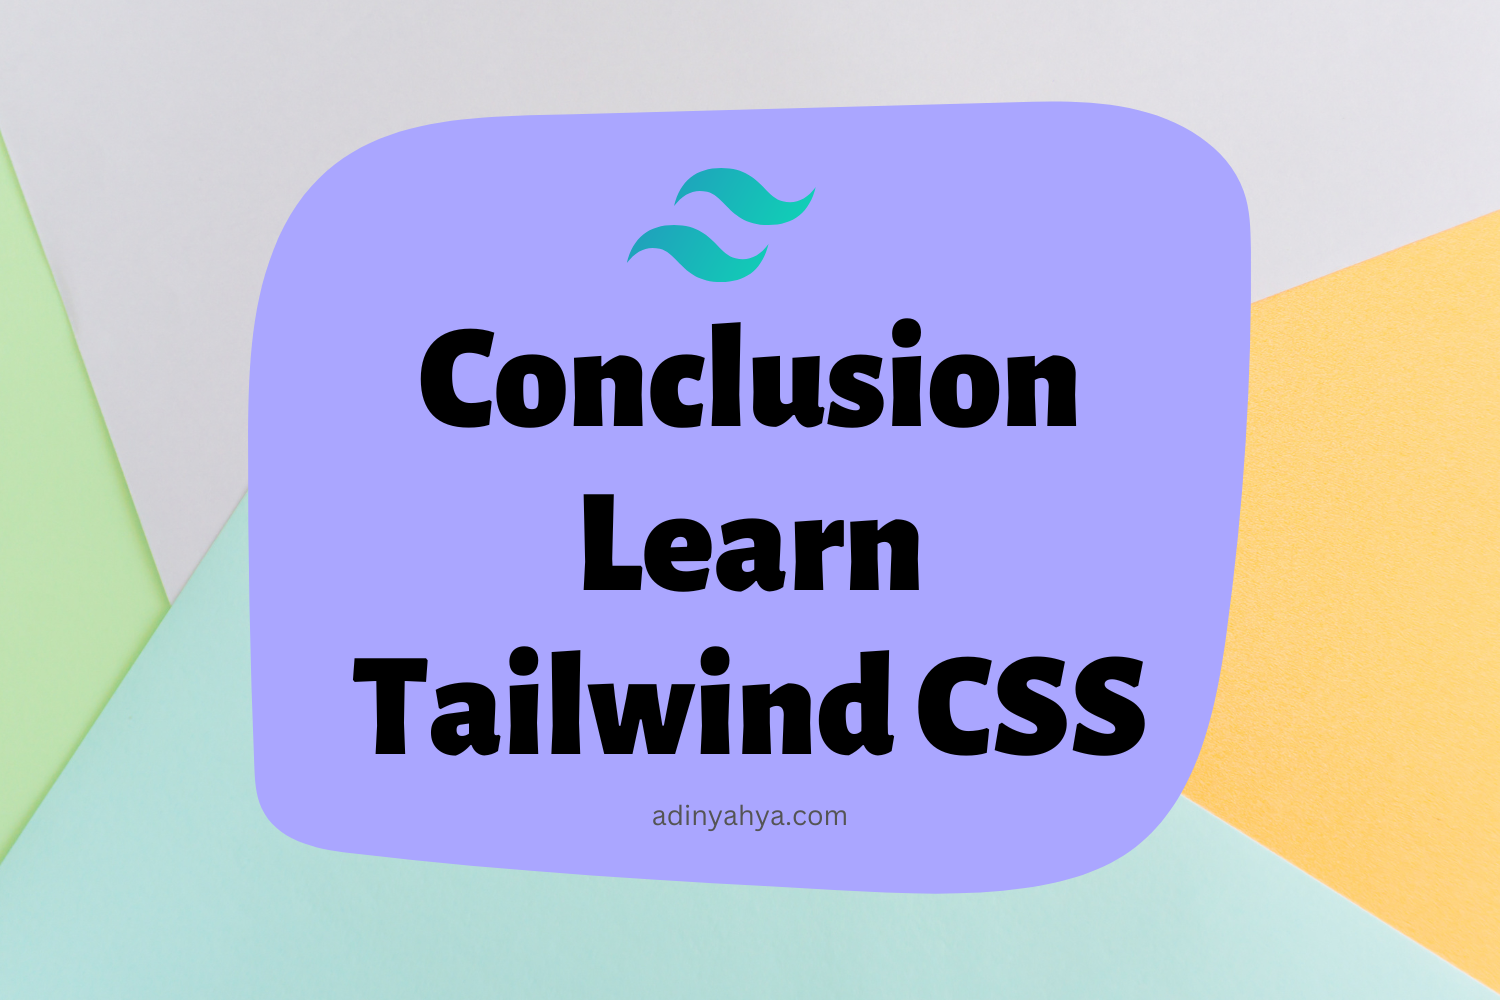 Conclusion learn Tailwind CSS